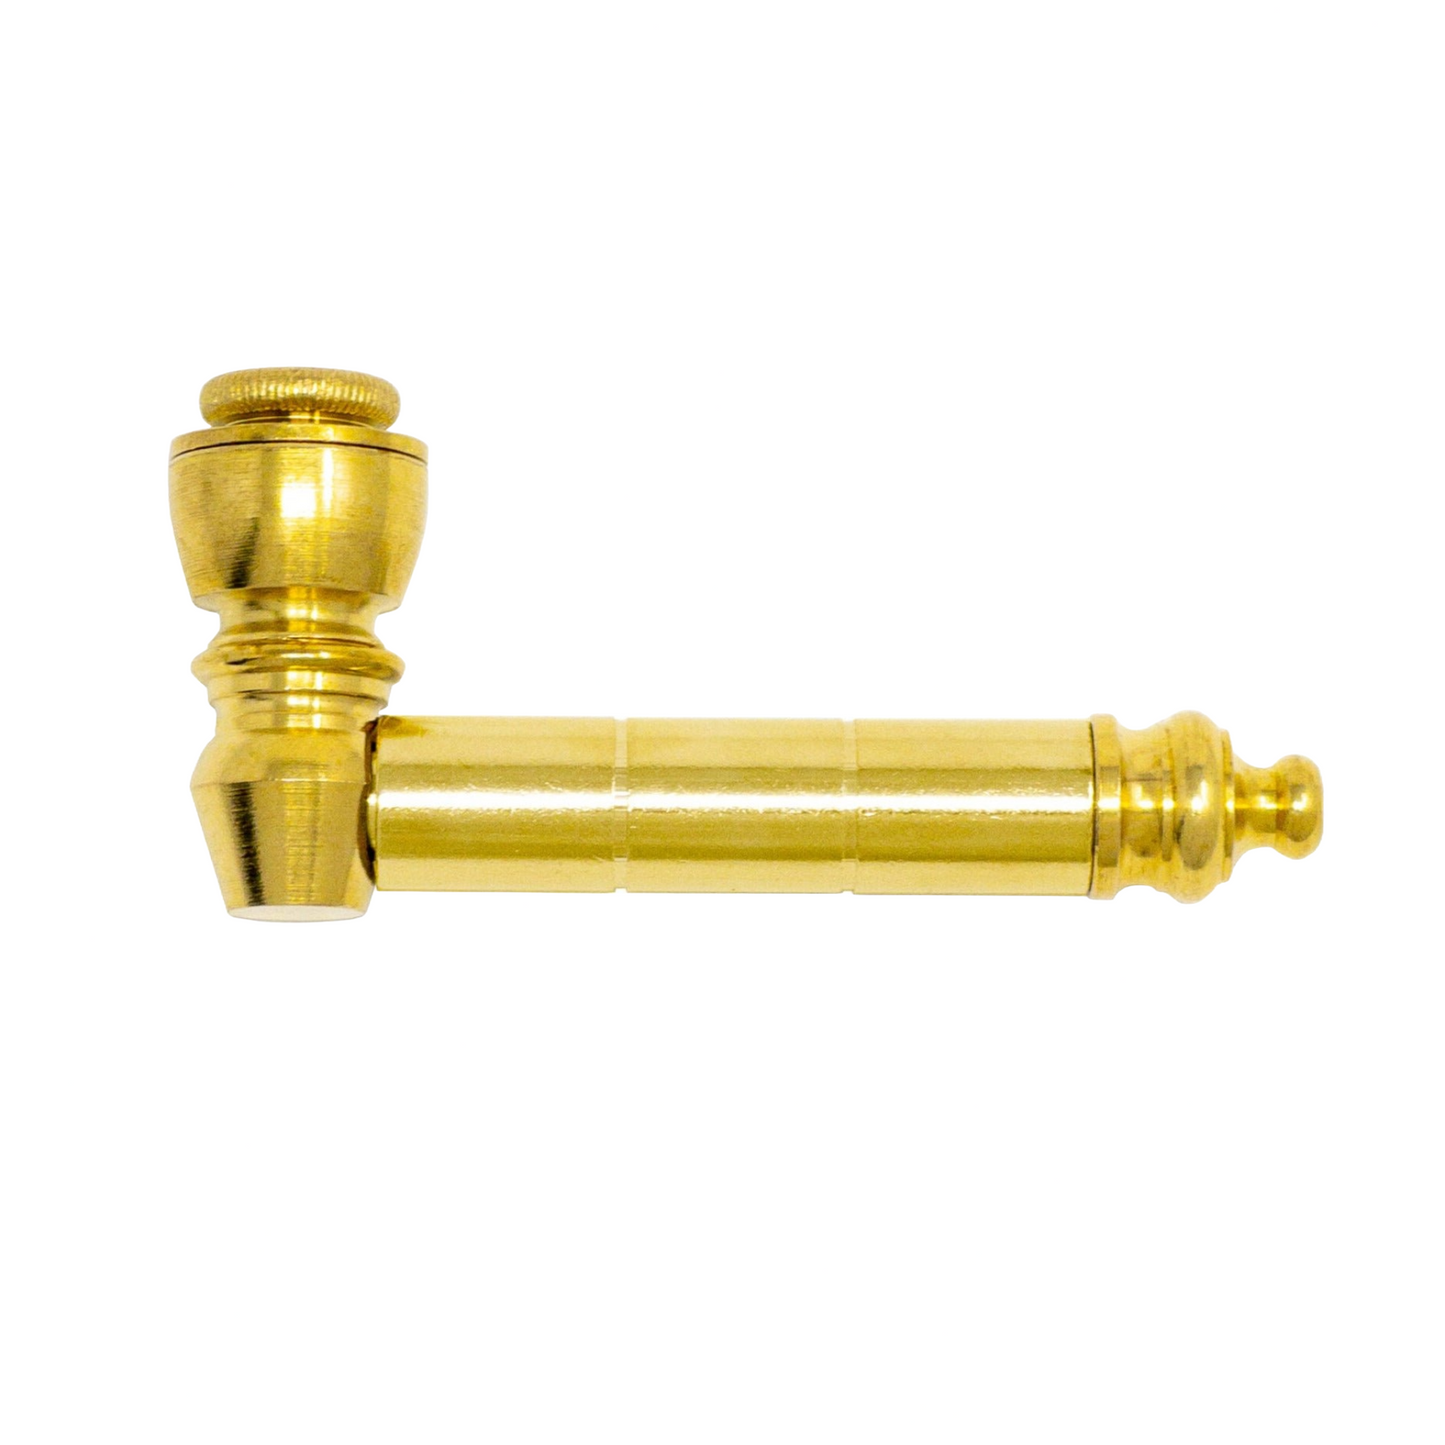 Metal Pipe with chamber - AMERICAN MADE - Brass, Anodized or Nickel Plated